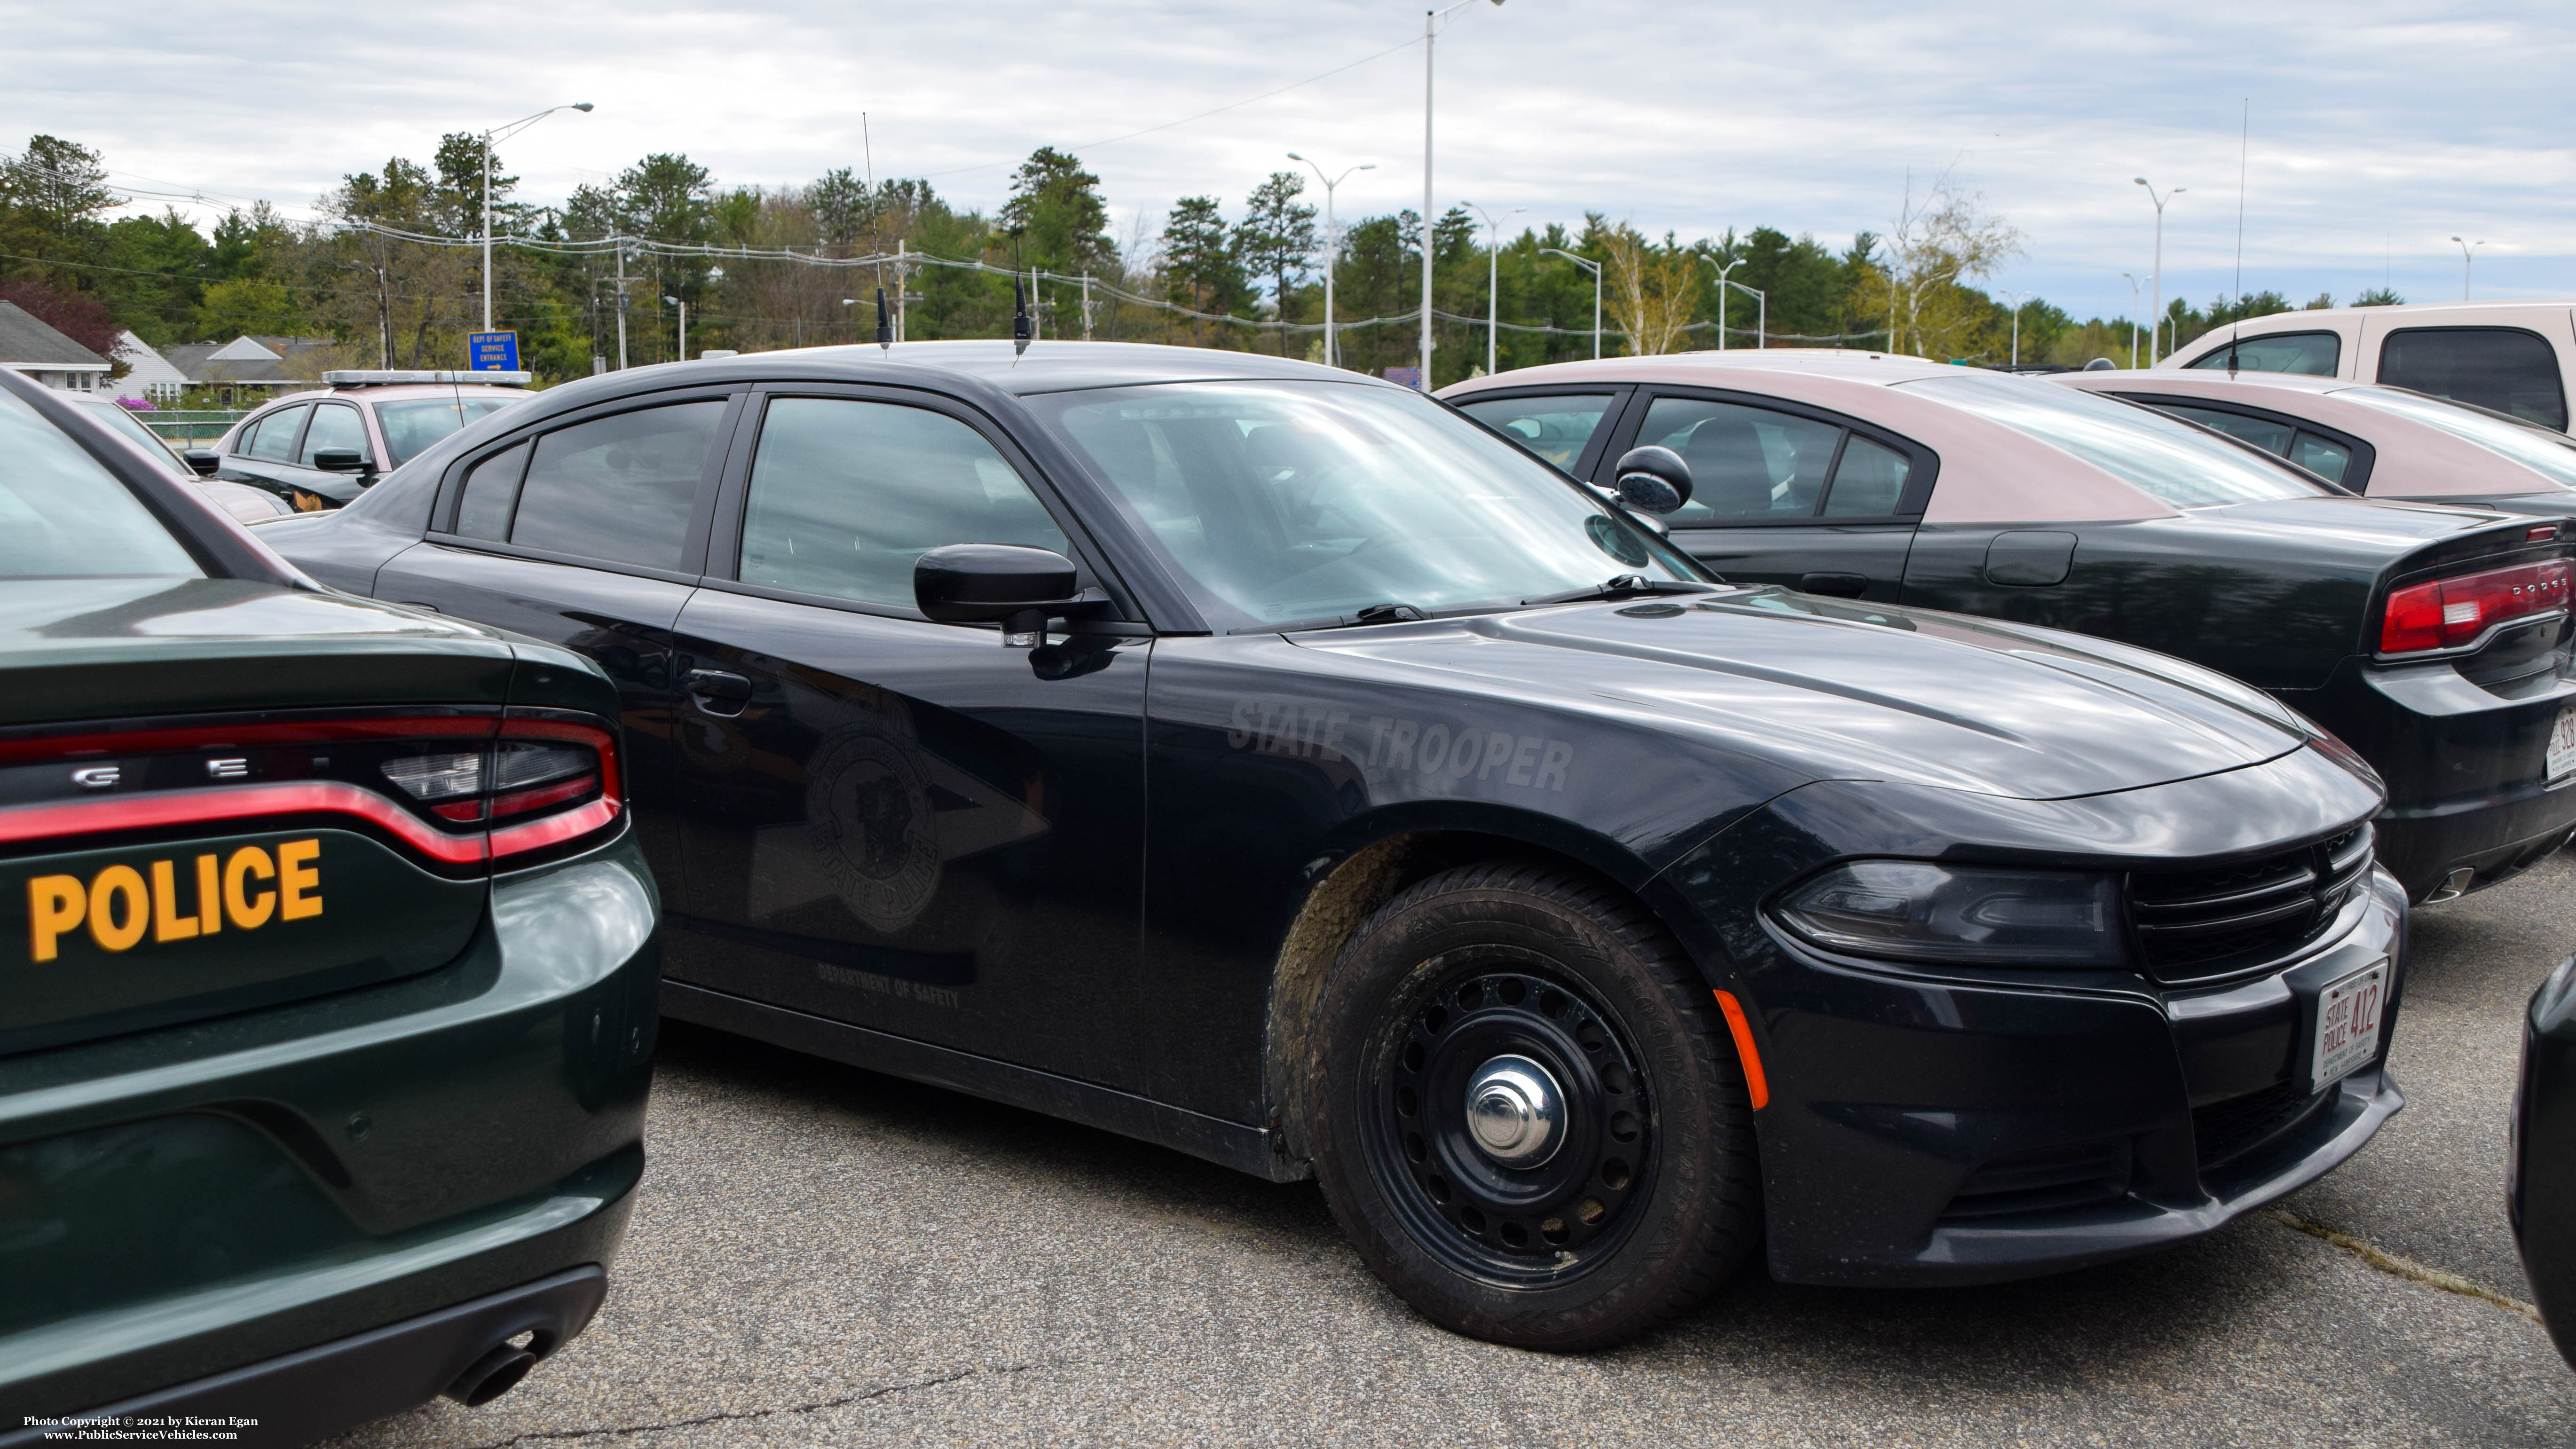 A photo  of New Hampshire State Police
            Cruiser 412, a 2015-2019 Dodge Charger             taken by Kieran Egan